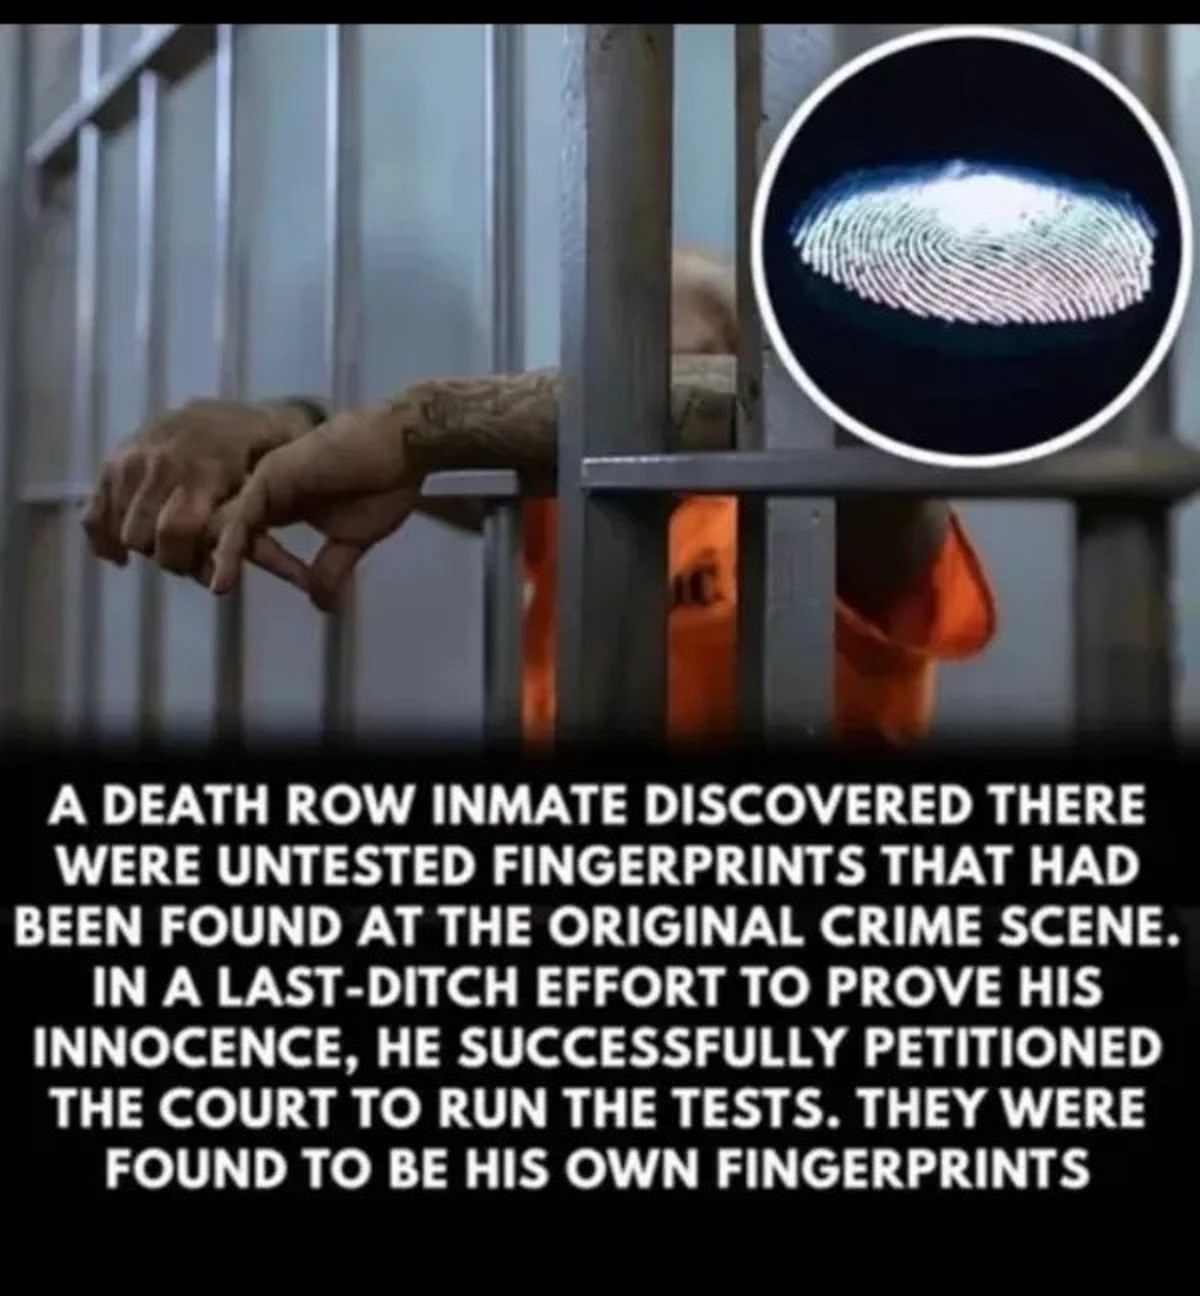 A Death Row Inmate Discovered There Were Untested Fingerprints That Had Been Found At The Original Crime Scene. In A LastDitch Effort To Prove His Innocence, He Successfully Petitioned The Court To Run The Tests. They Were Found To Be His Own Fingerprints